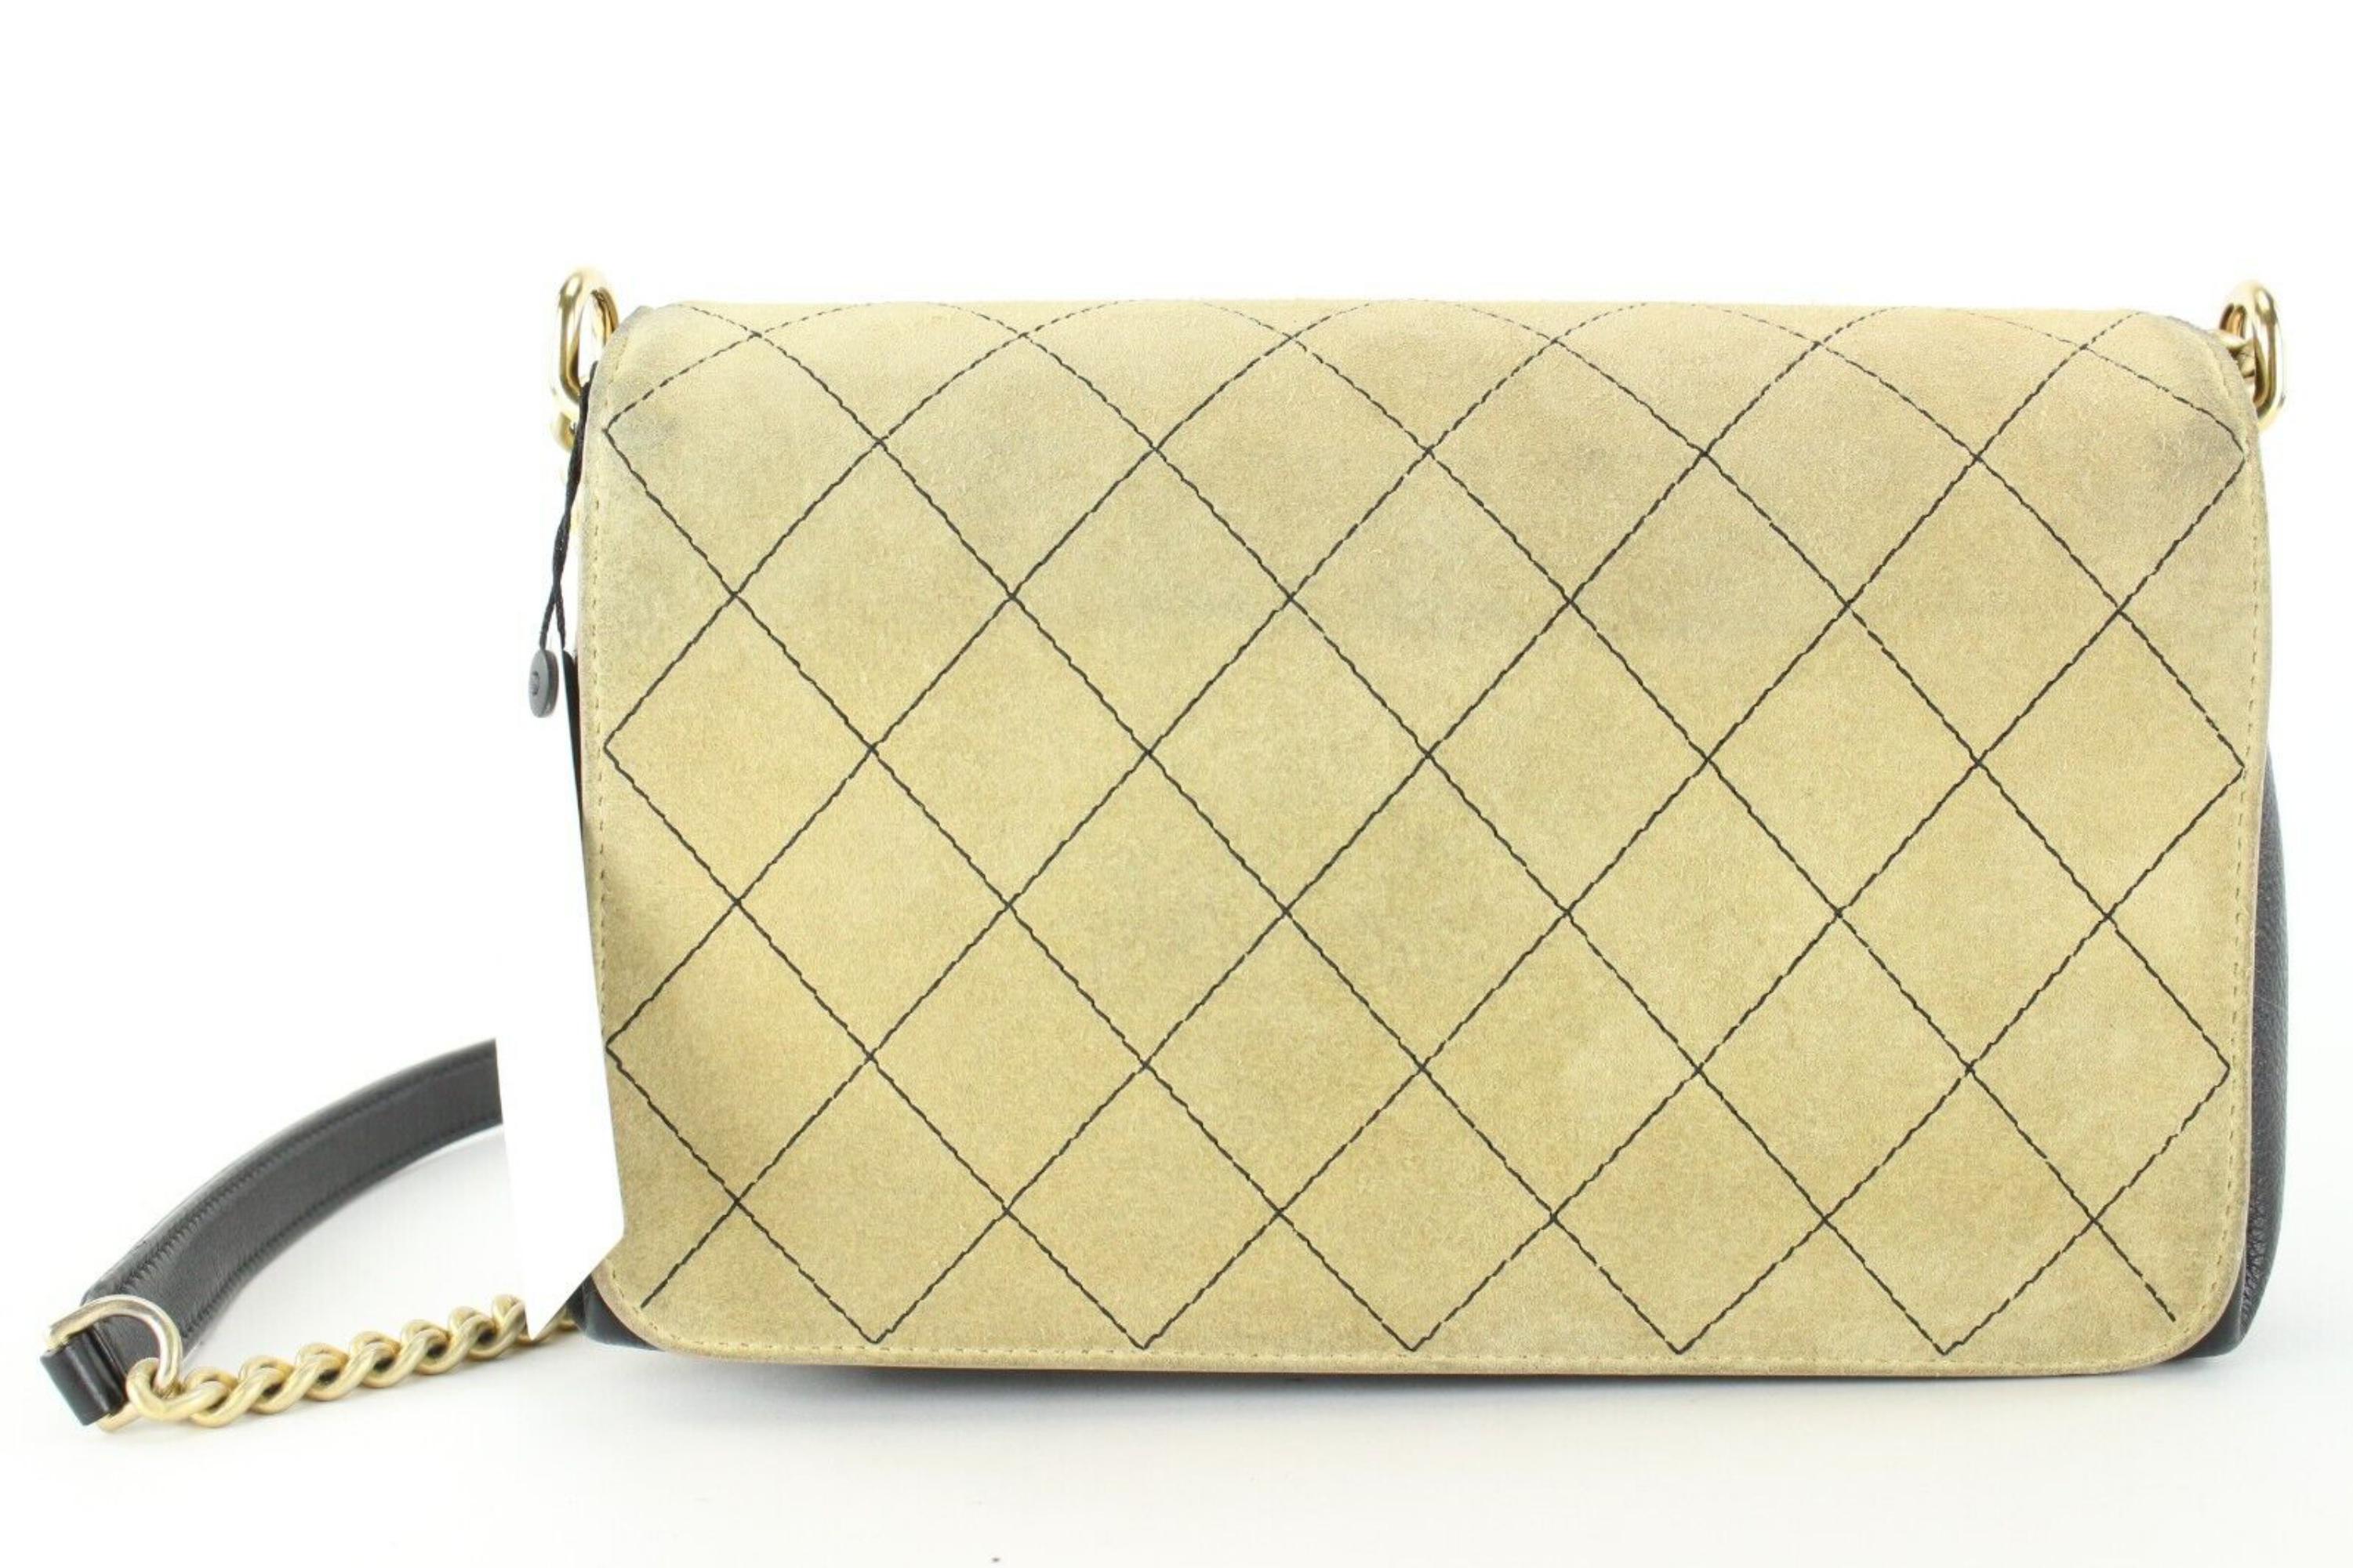 Chanel Beige Quilted Suede x Black Leather Classic Flap Bag 2CC1202 For Sale 3